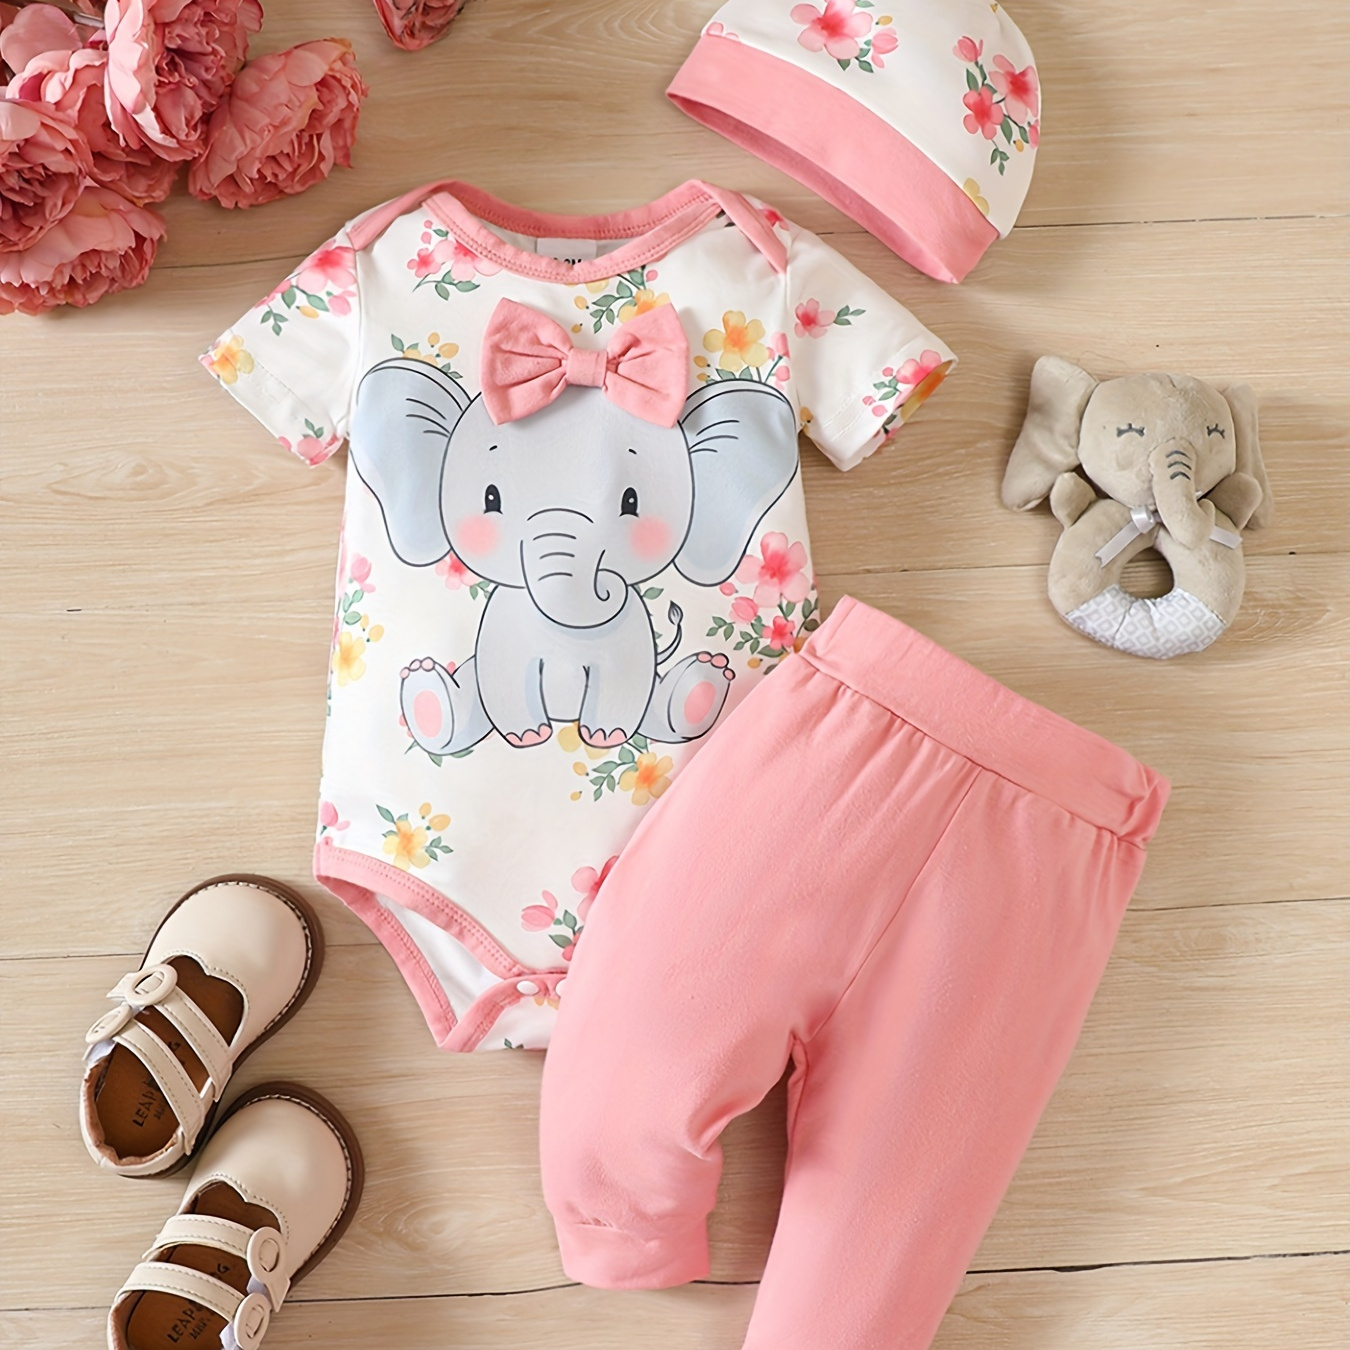 

3pcs, Infant Super Cute Elephant Print Bow Short Sleeve Romper Top + Pants + Hat Set, Newborn Baby Girls Lovely Casual Outfits Clothes